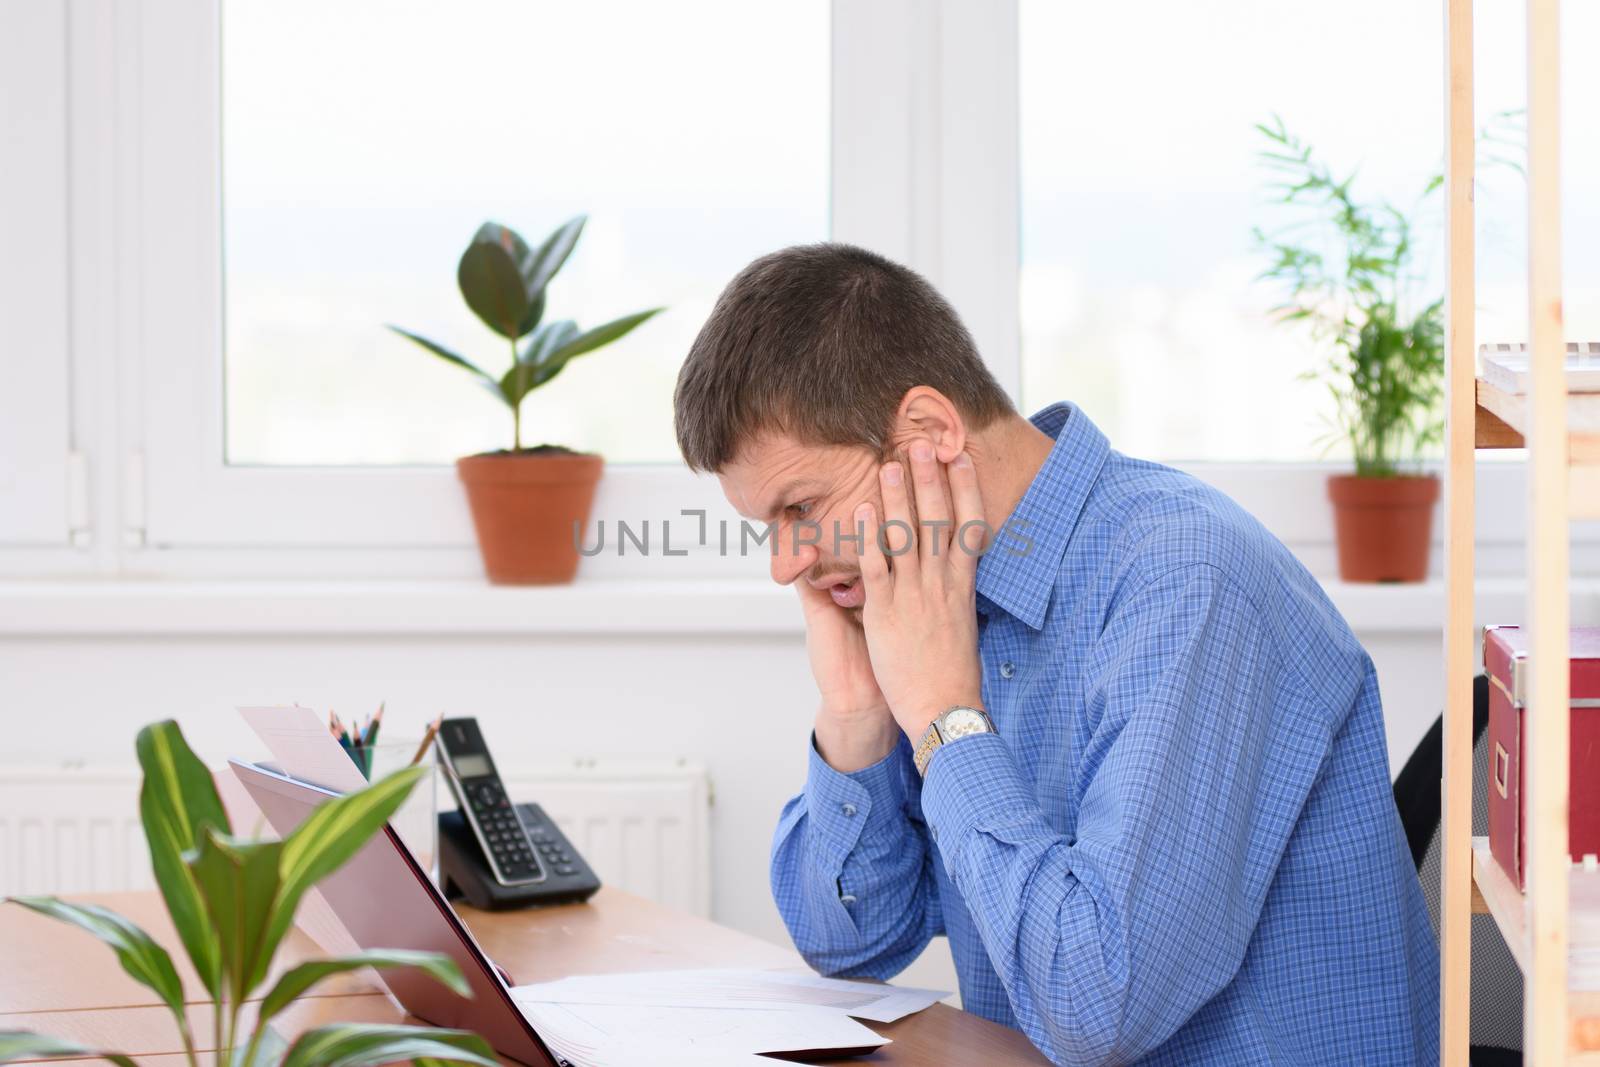 Office clerk grimacing grimacing pain on his face looking at a laptop